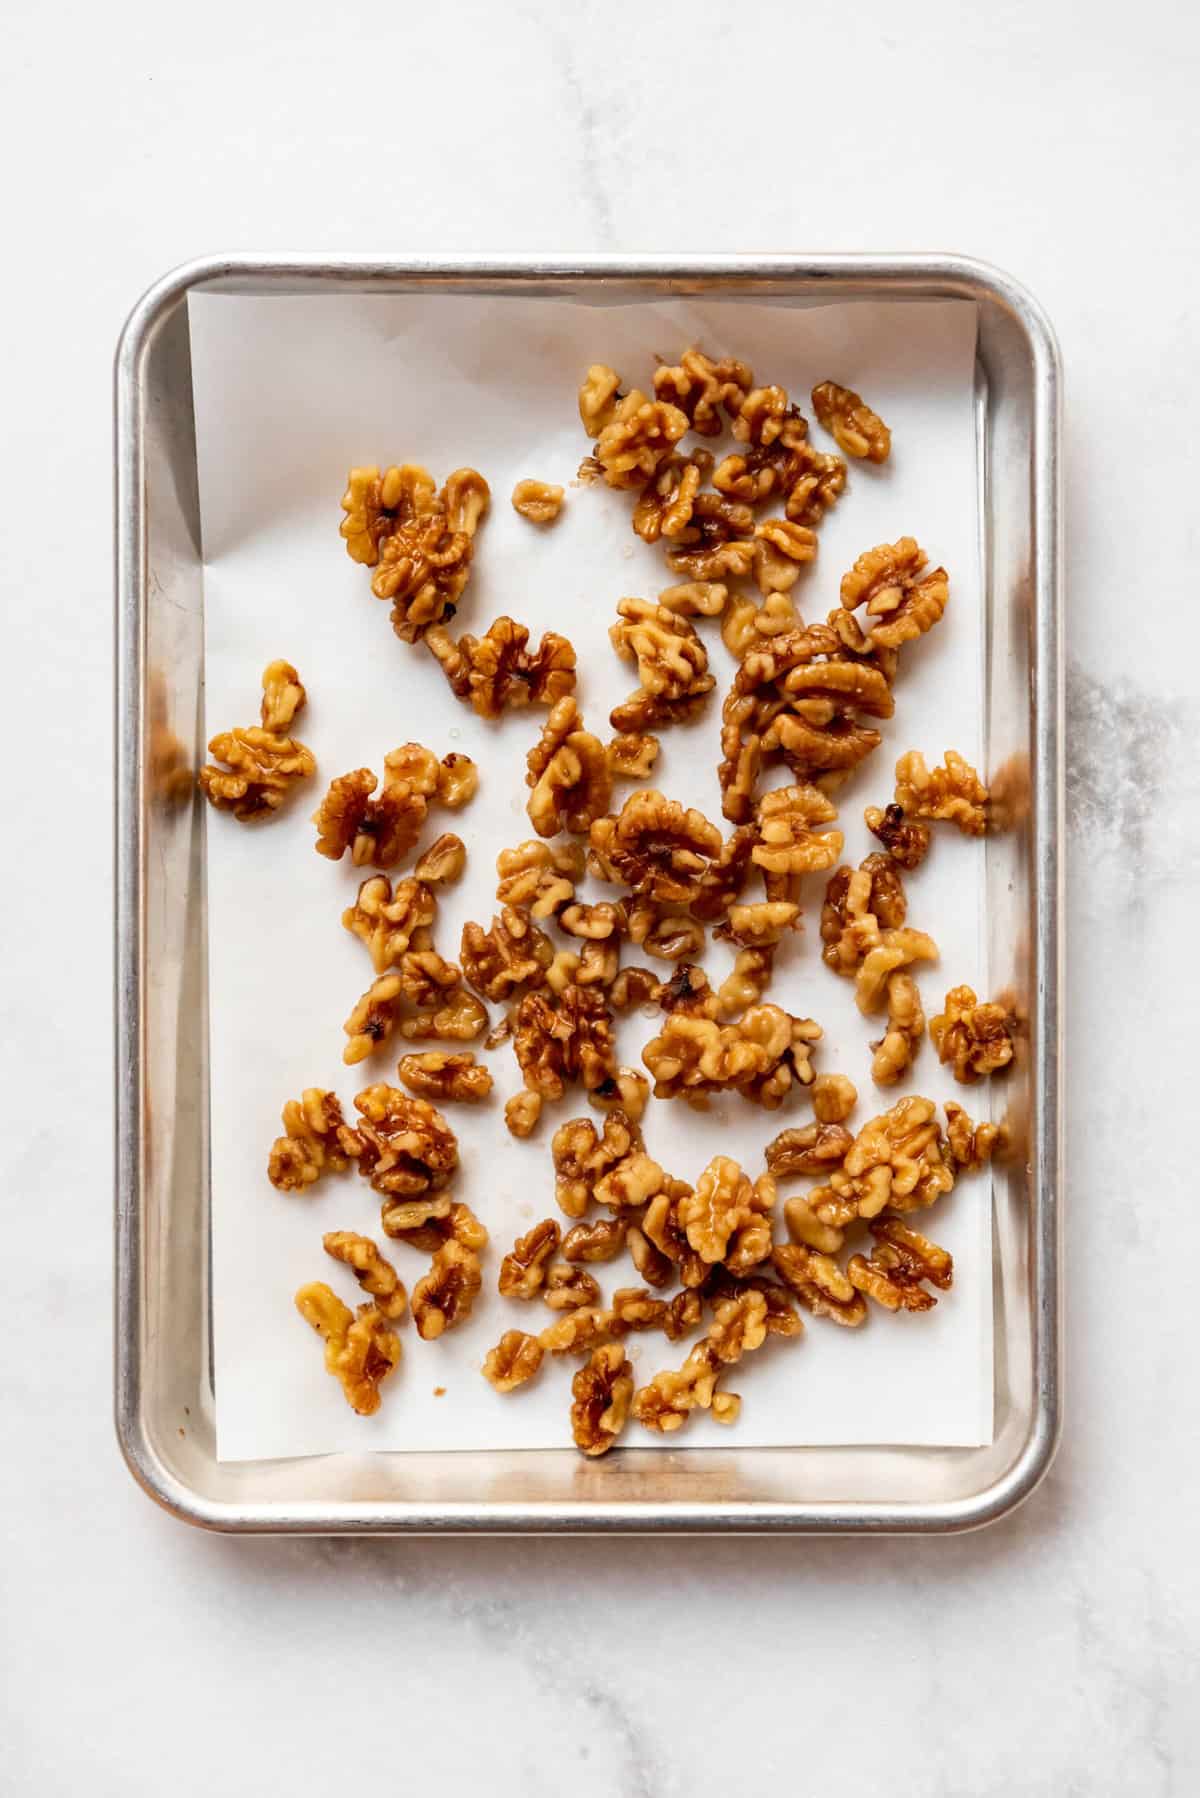 Walnuts spread on a baking sheet lined with parchment paper.